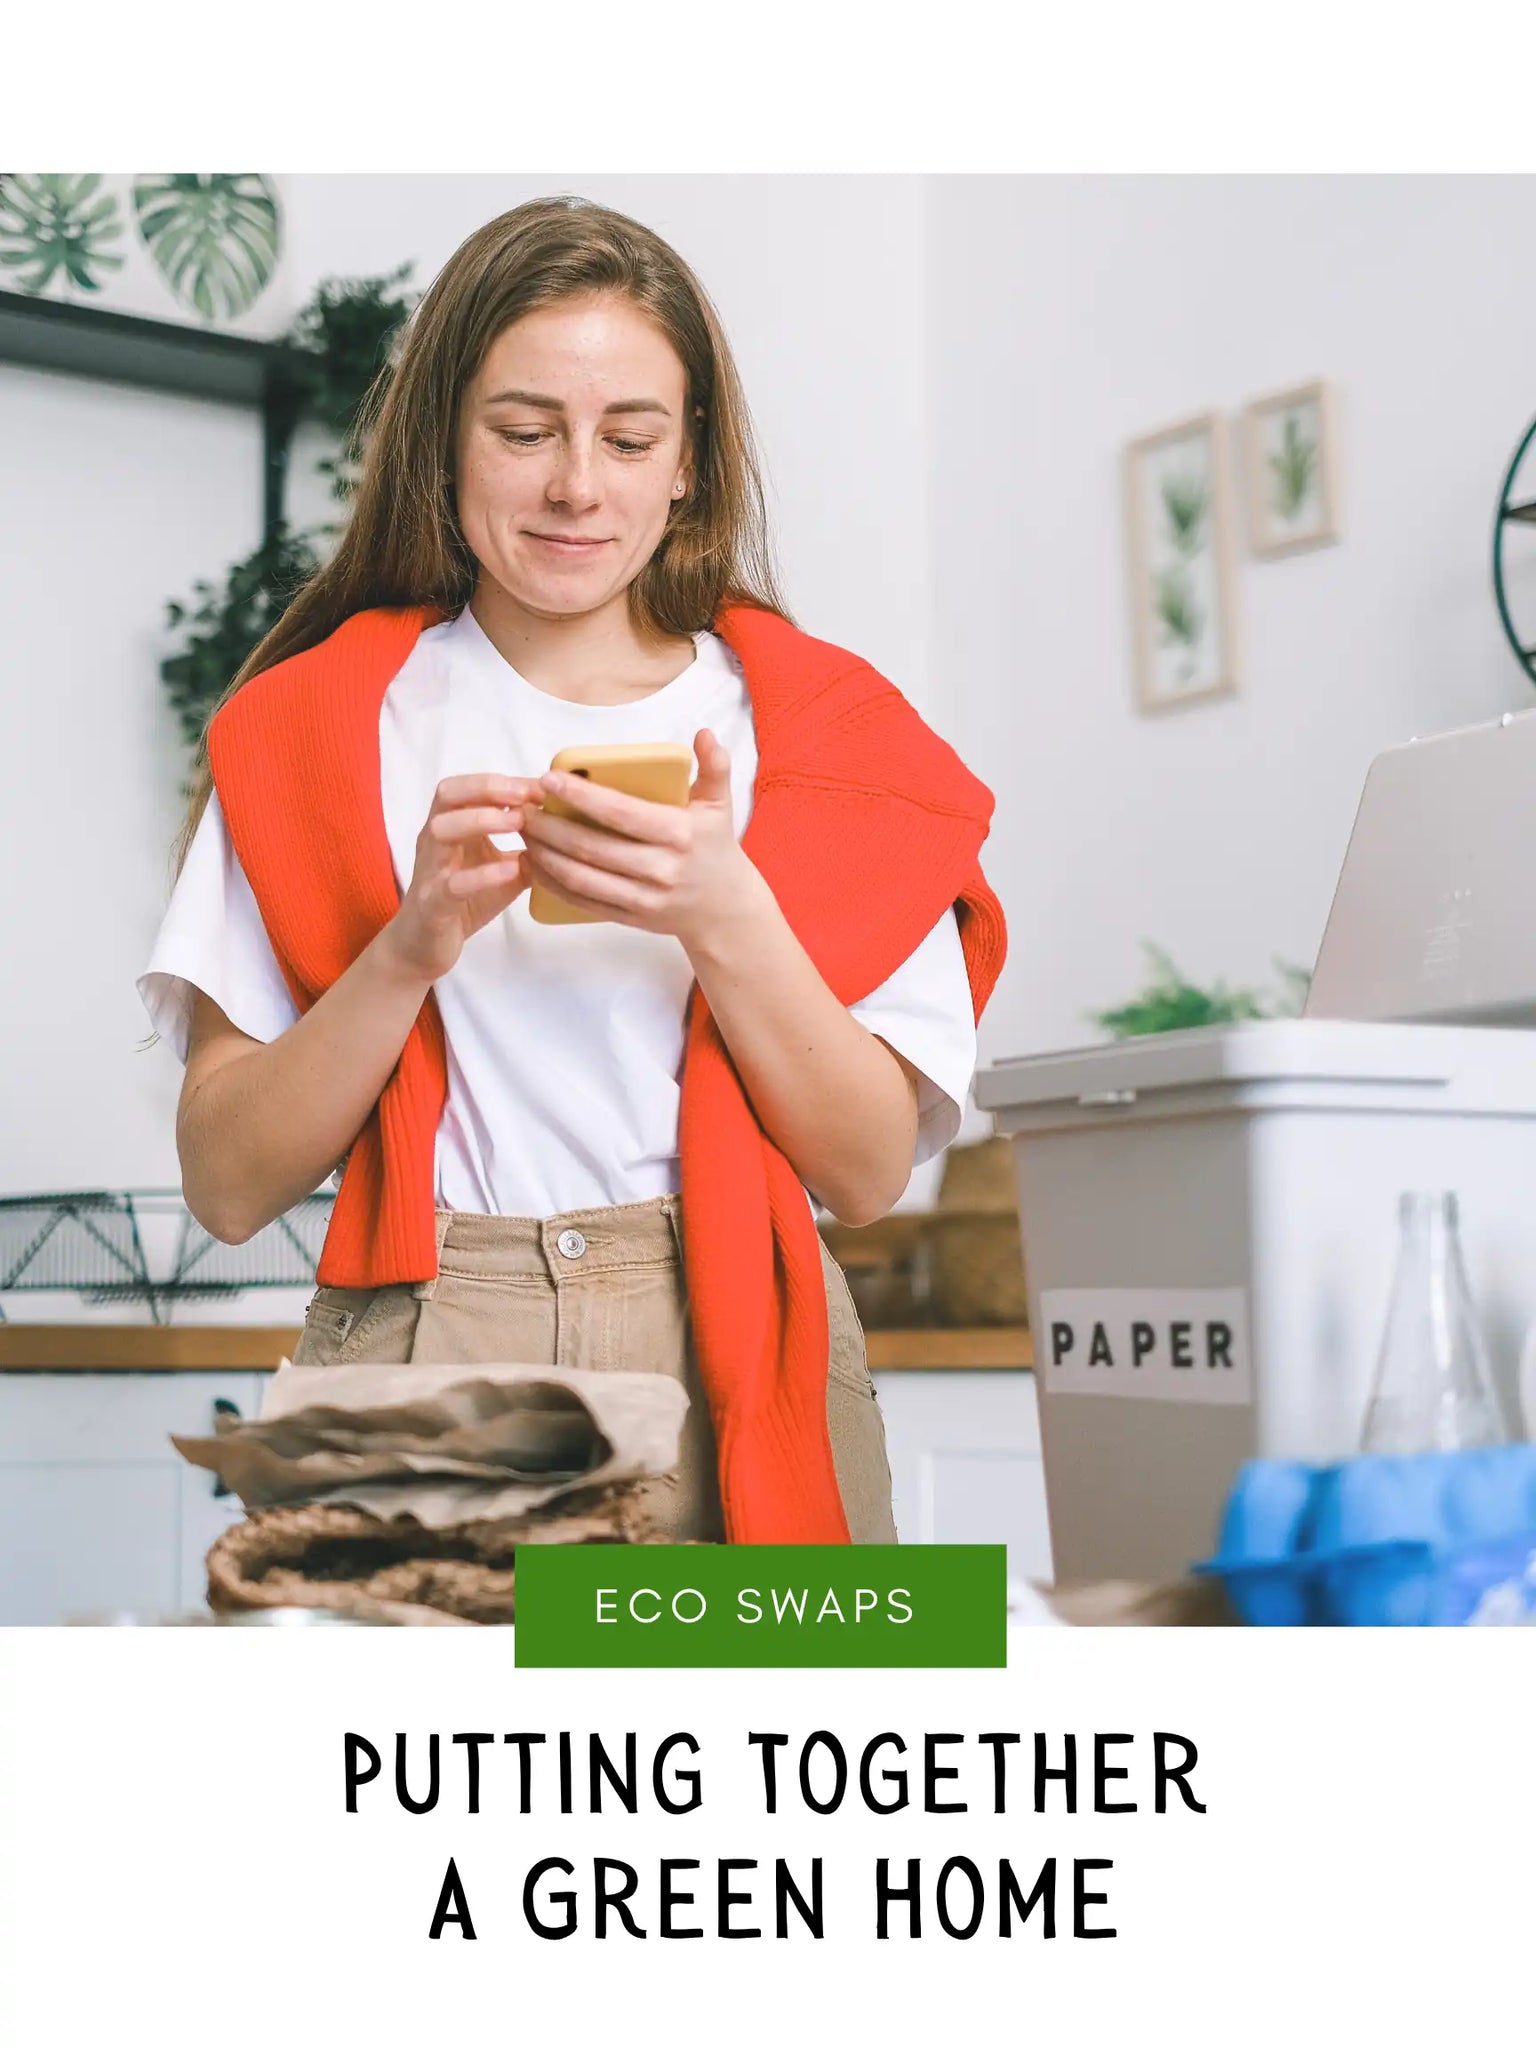 Smiling woman sorting waste and using smartphone in the kitchen